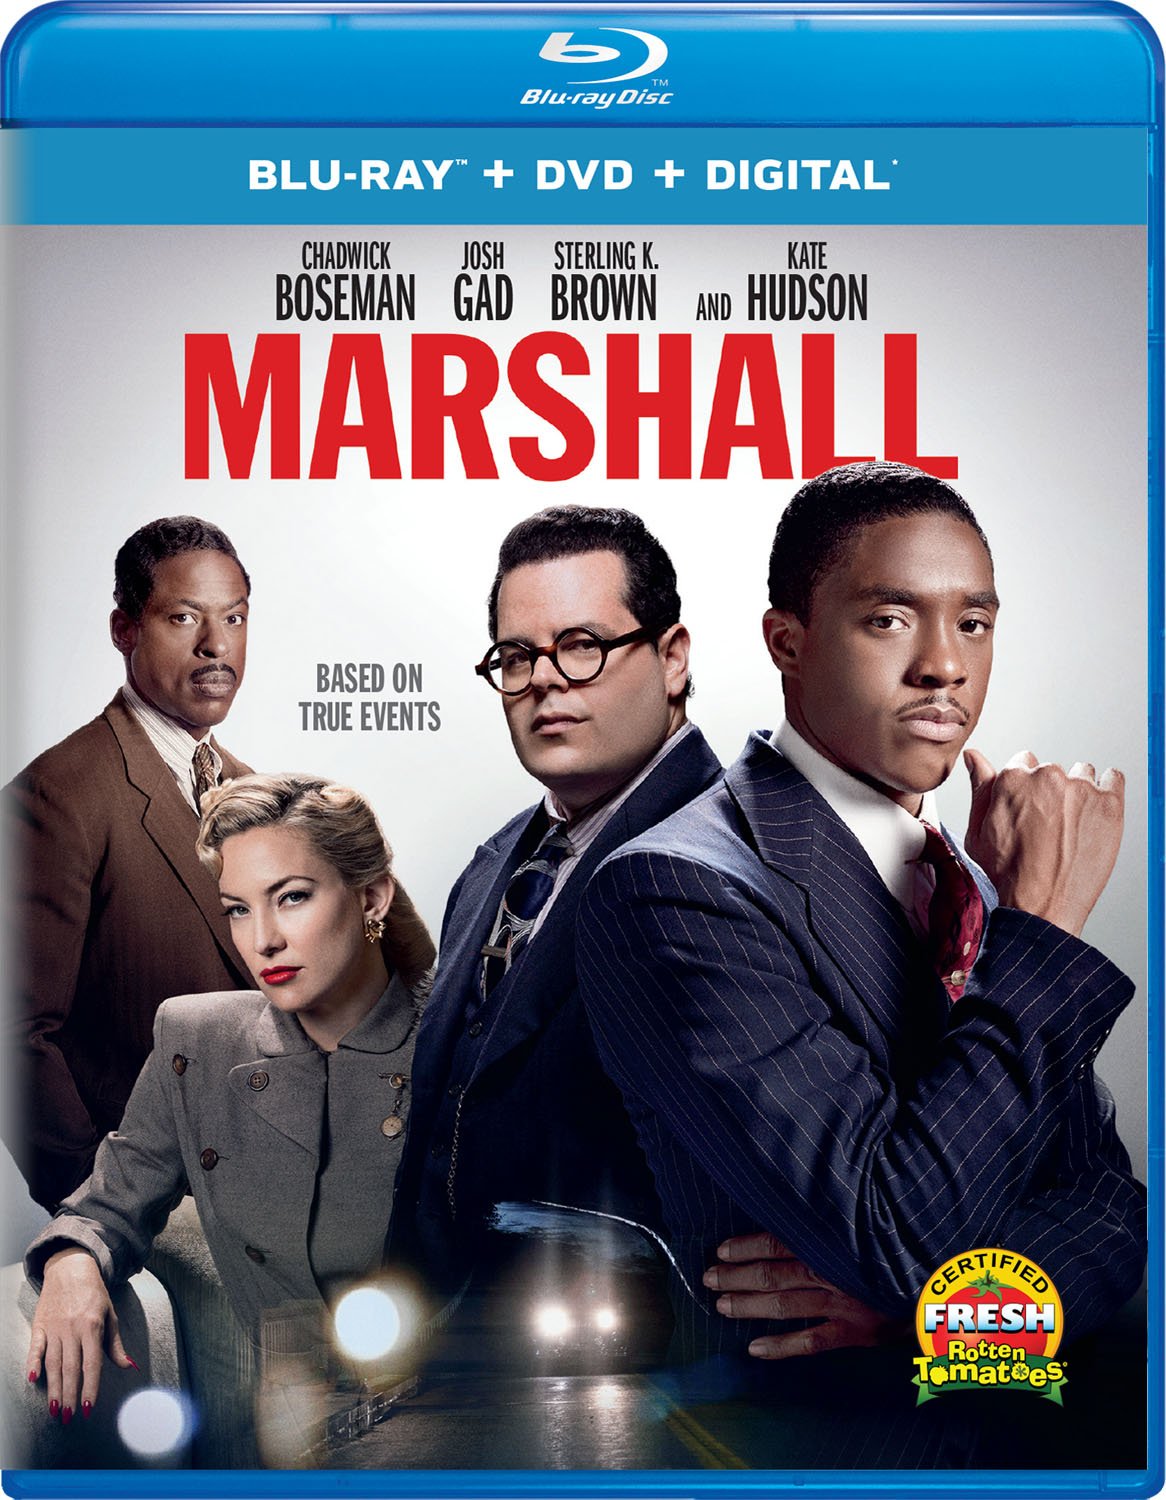 Marshall DVD Release Date January 9, 20181166 x 1500